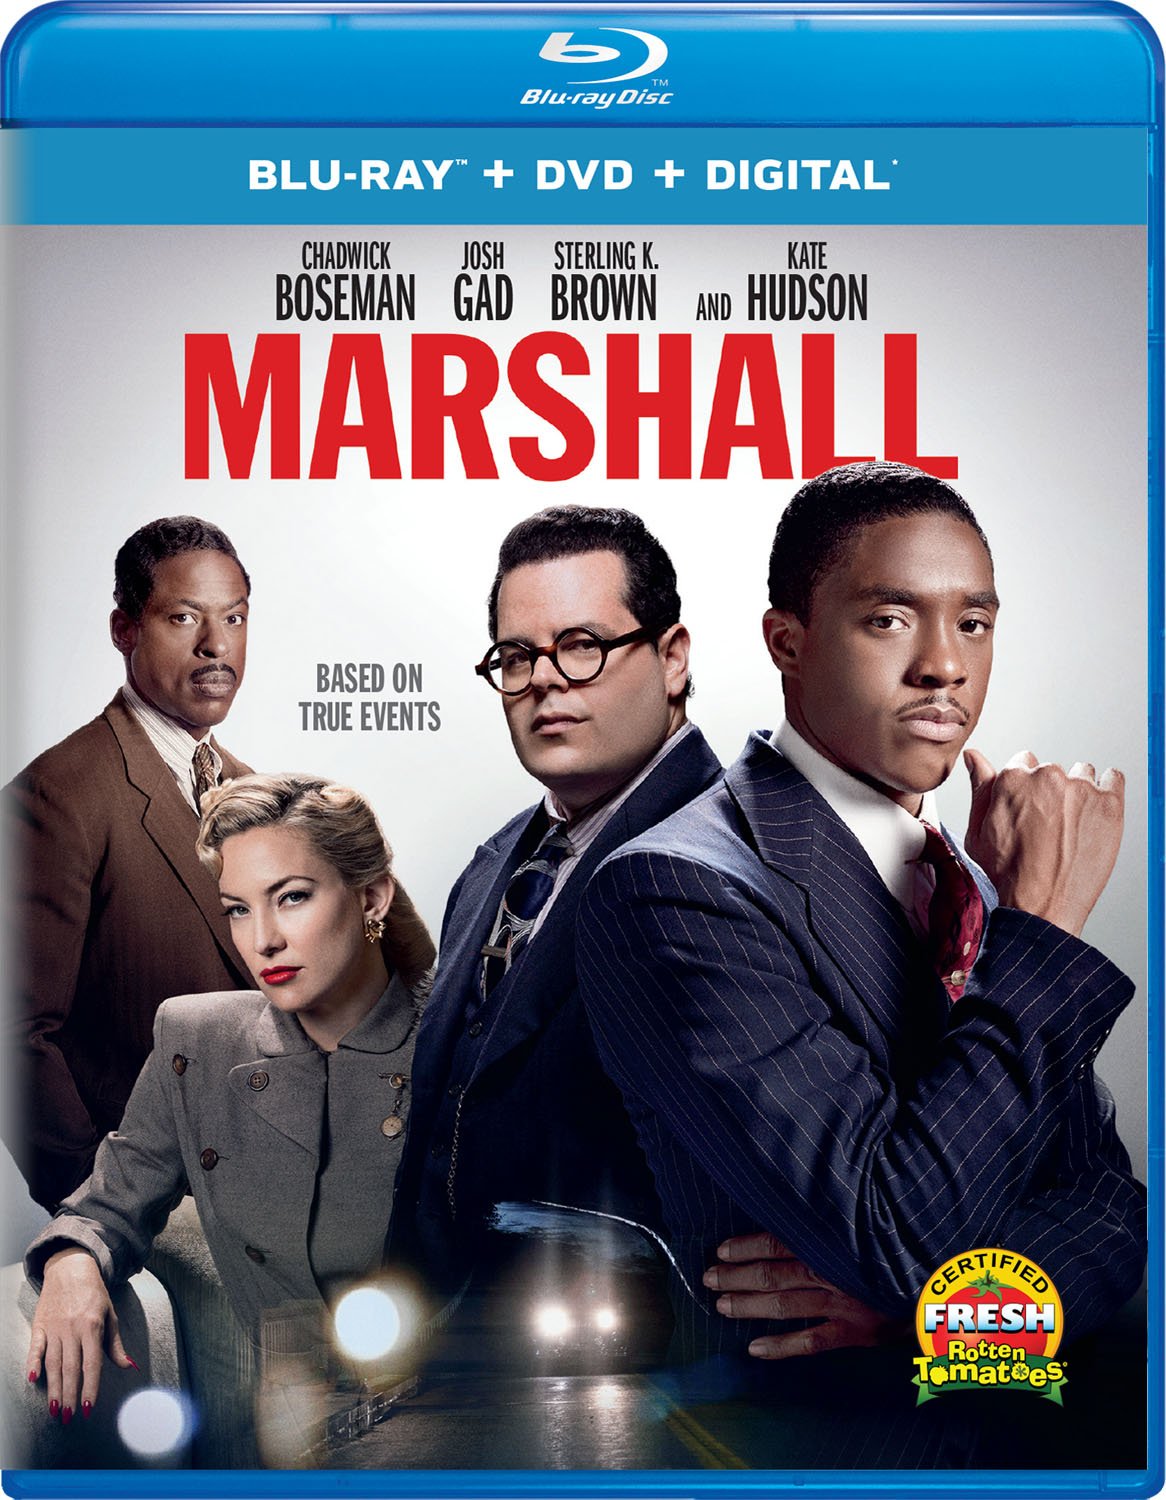 Marshall DVD Release Date January 9, 20181166 x 1500